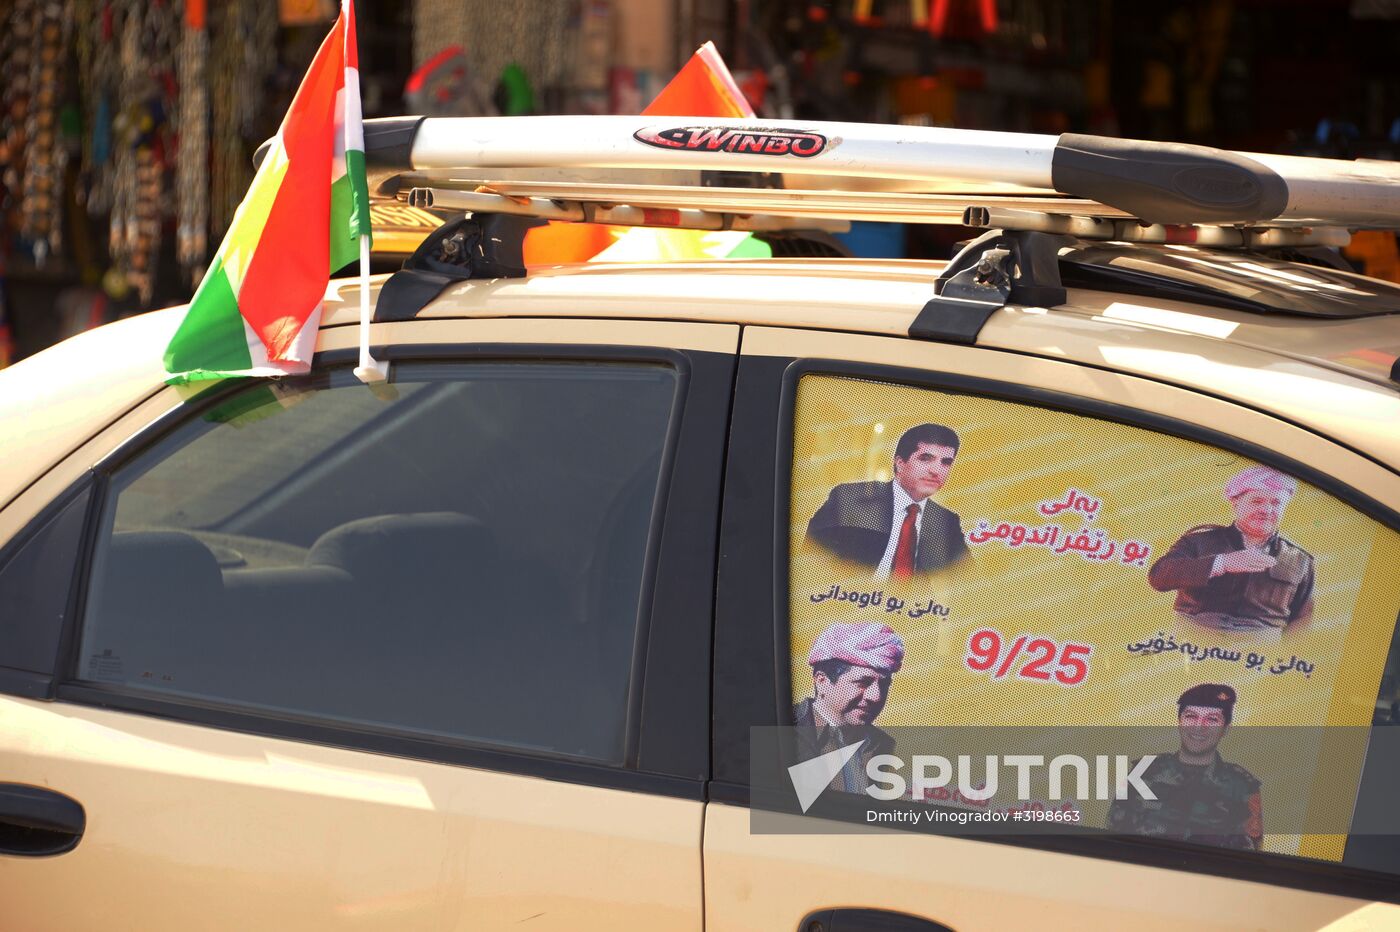 Campaigning for Iraqi Kurdistan independence in Erbil